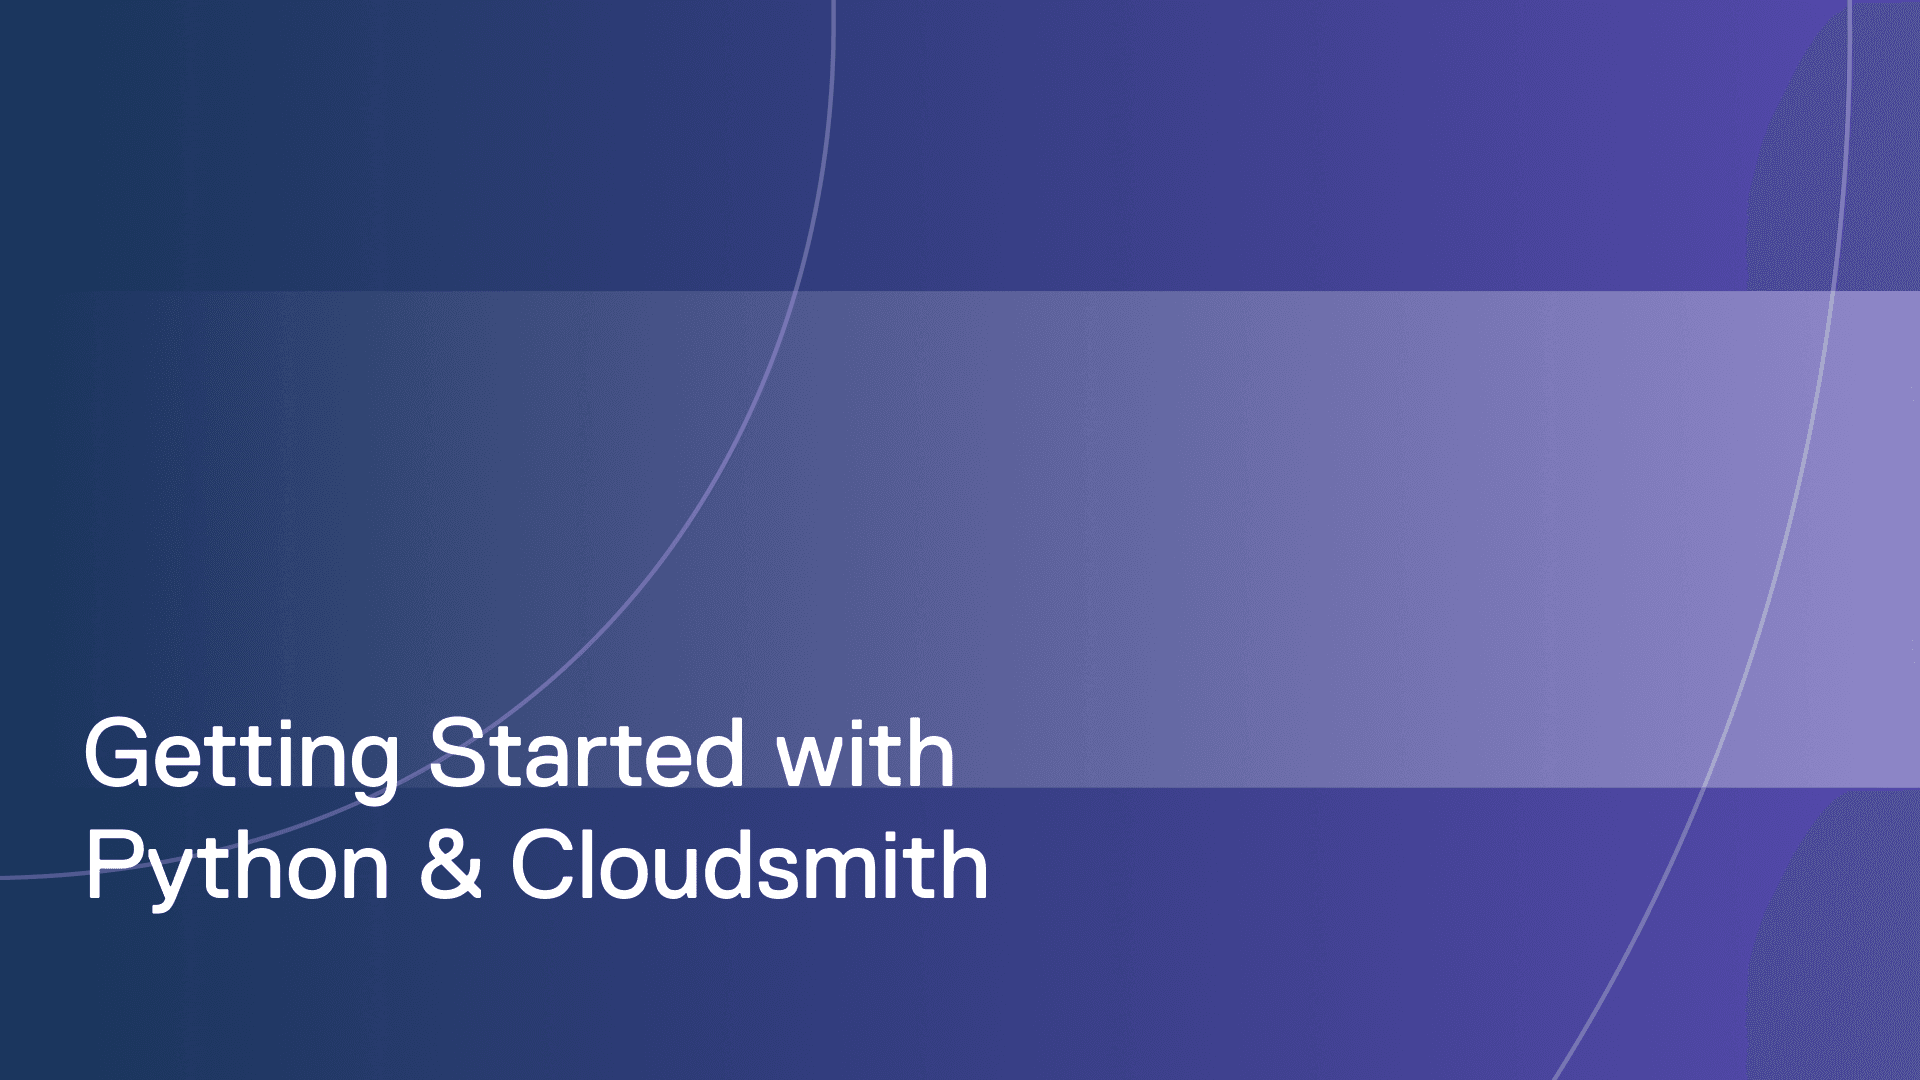 Getting Started with Python on Cloudsmith